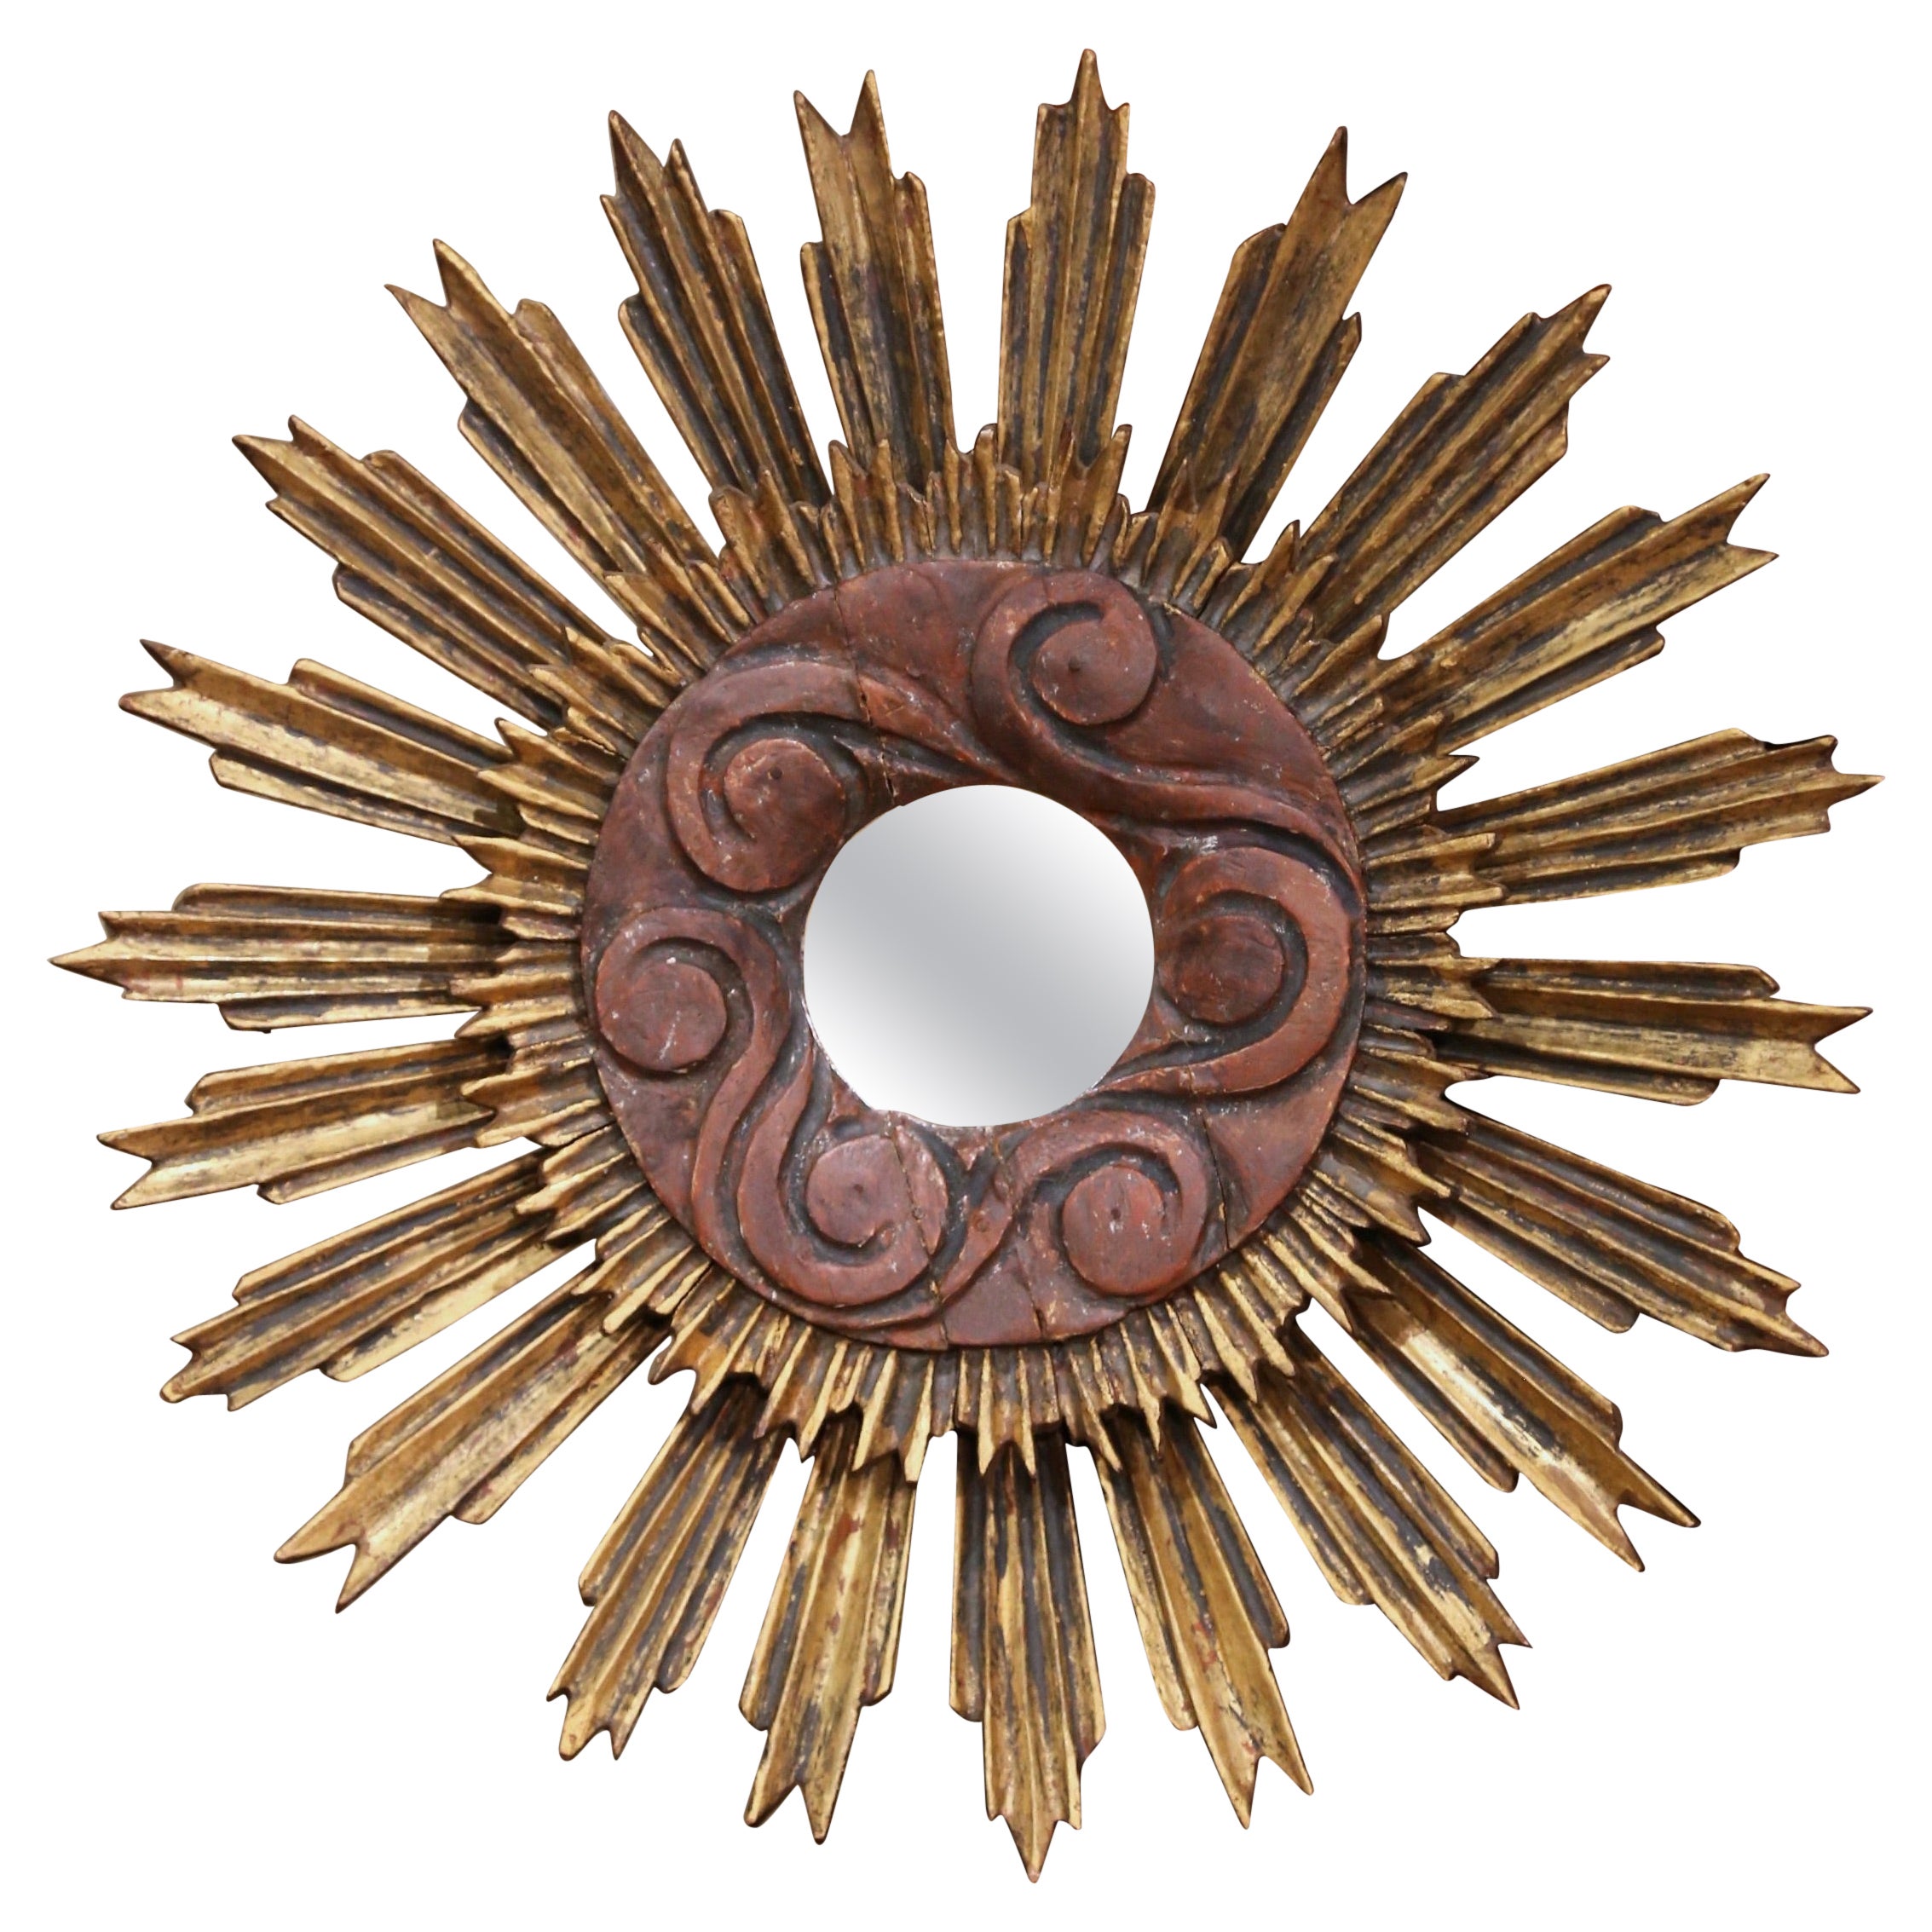 Early 20th Century Spanish Carved Giltwood and Painted Sunburst Mirror